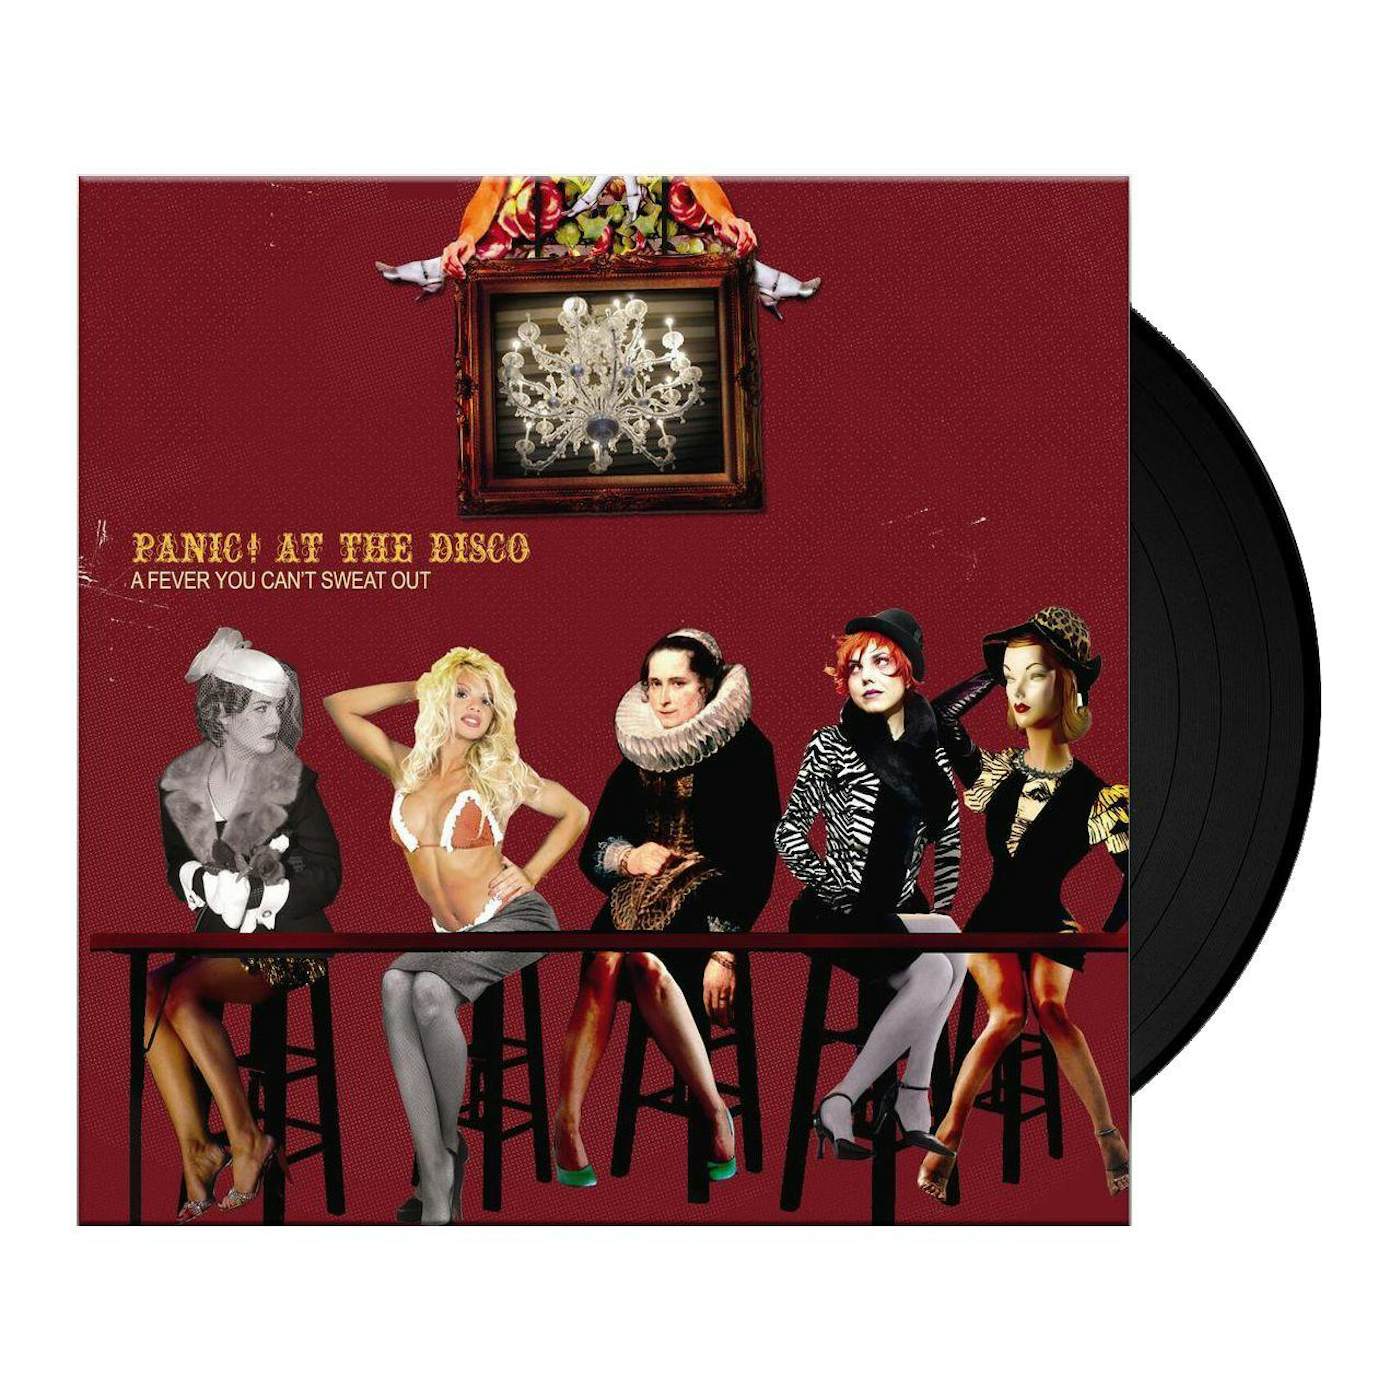 Panic! At The Disco Fever You Can't Sweat Out Vinyl Record